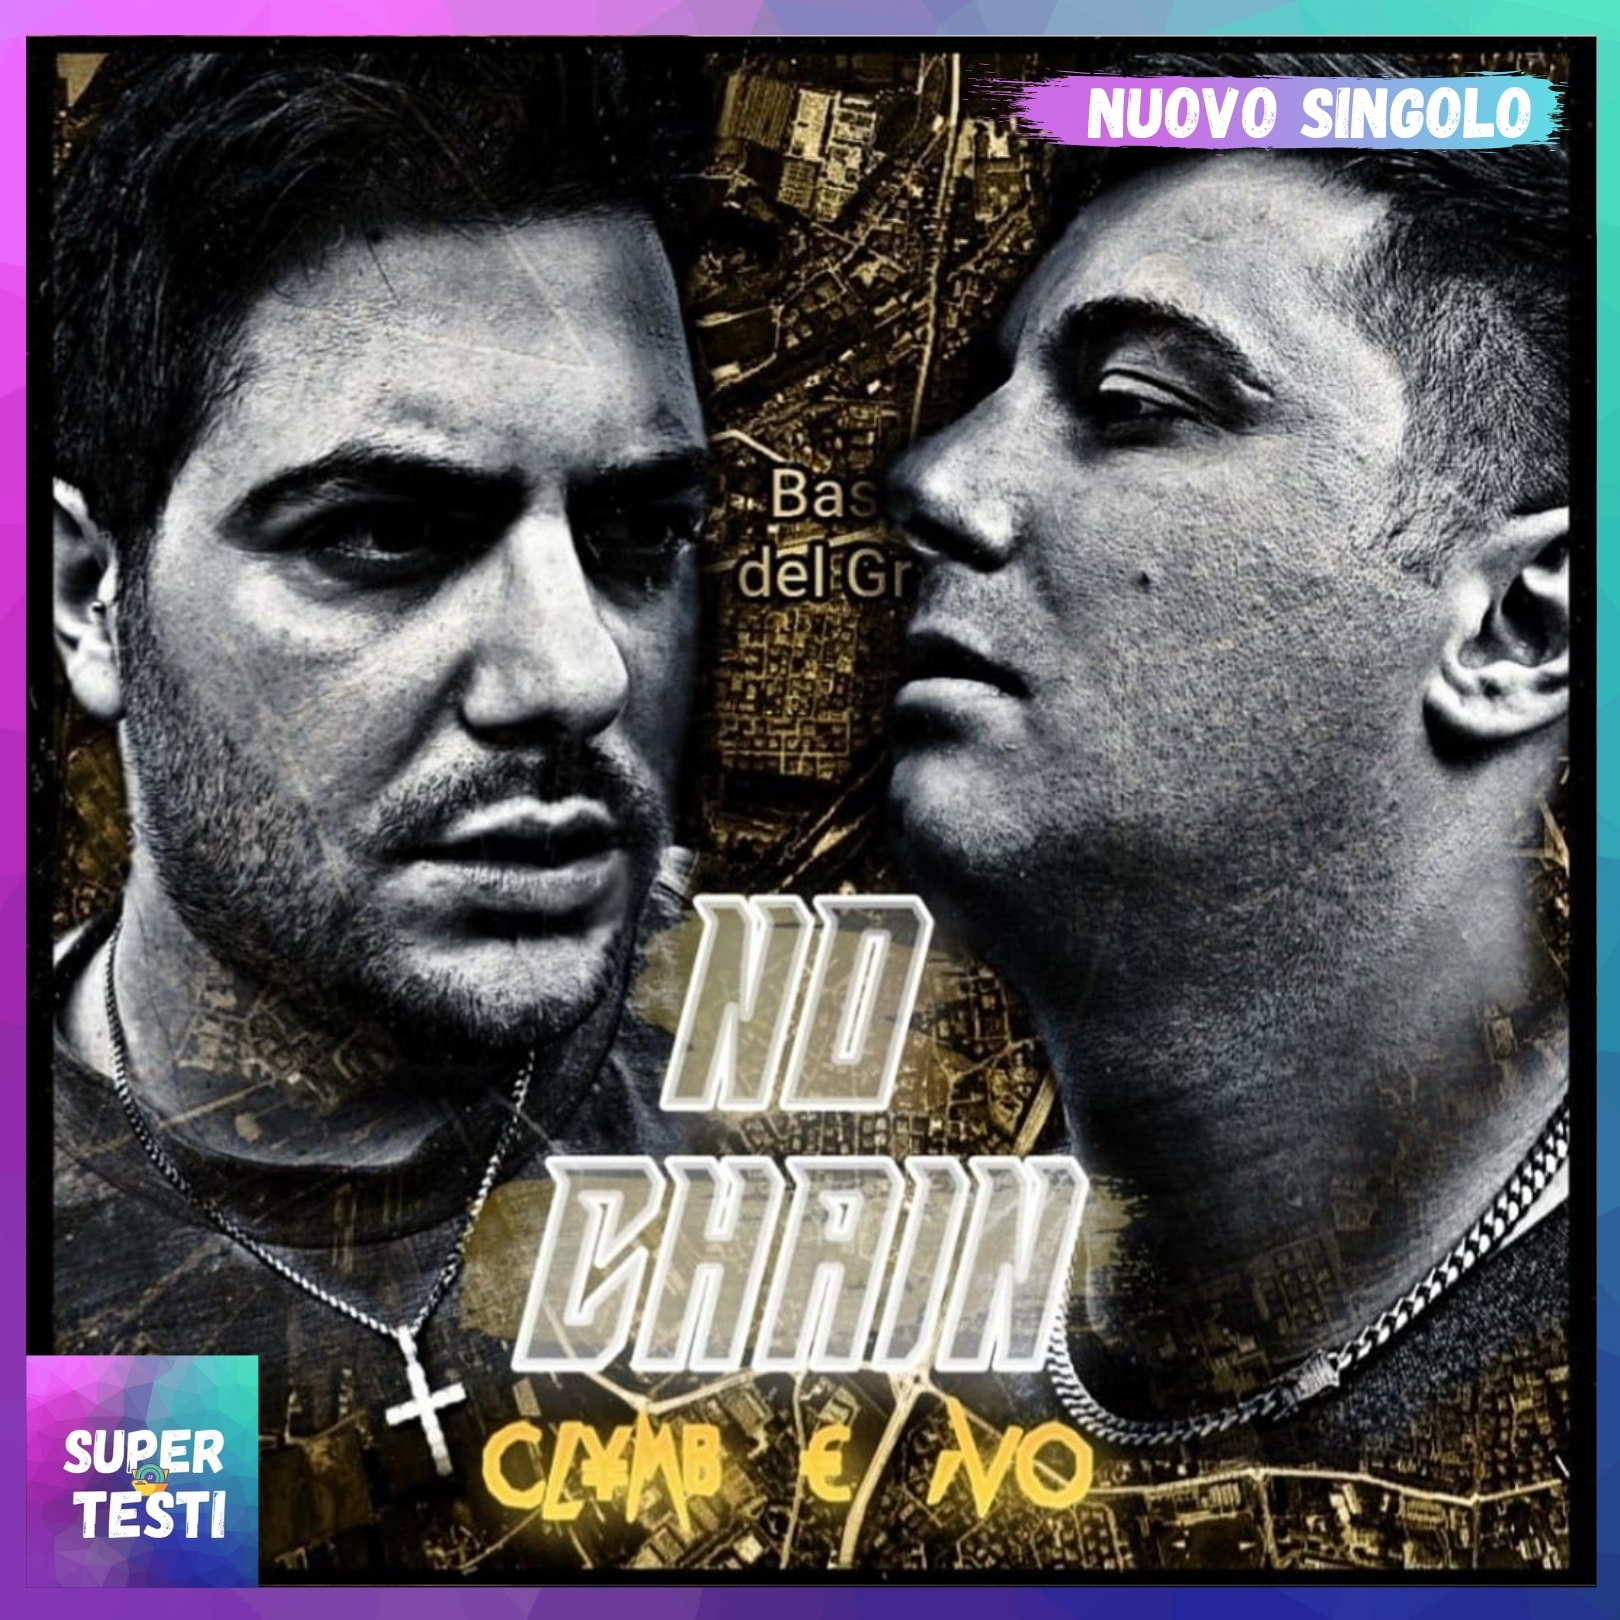 IVO & CL¥MB insieme in "No chain"   